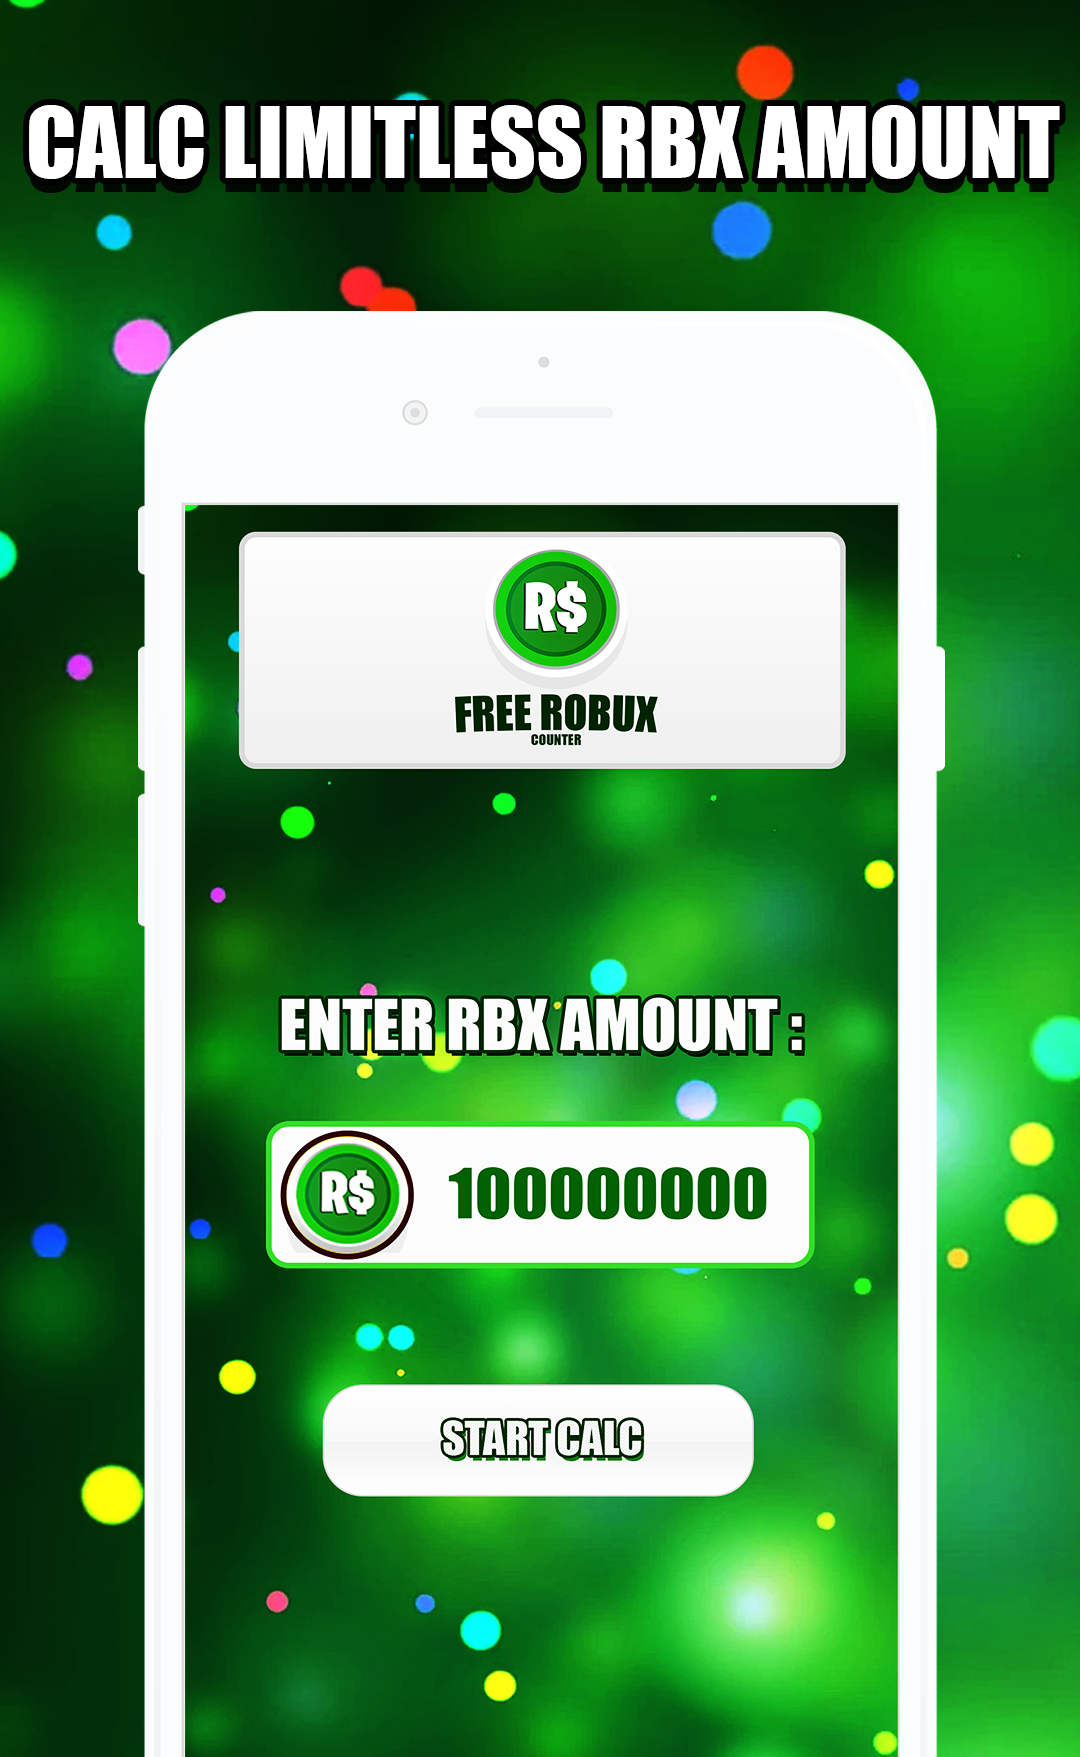 Free Robux Calc For Roblox S Rbx 2020 Pre Register Download Taptap - i just got tons of robux copy and paste